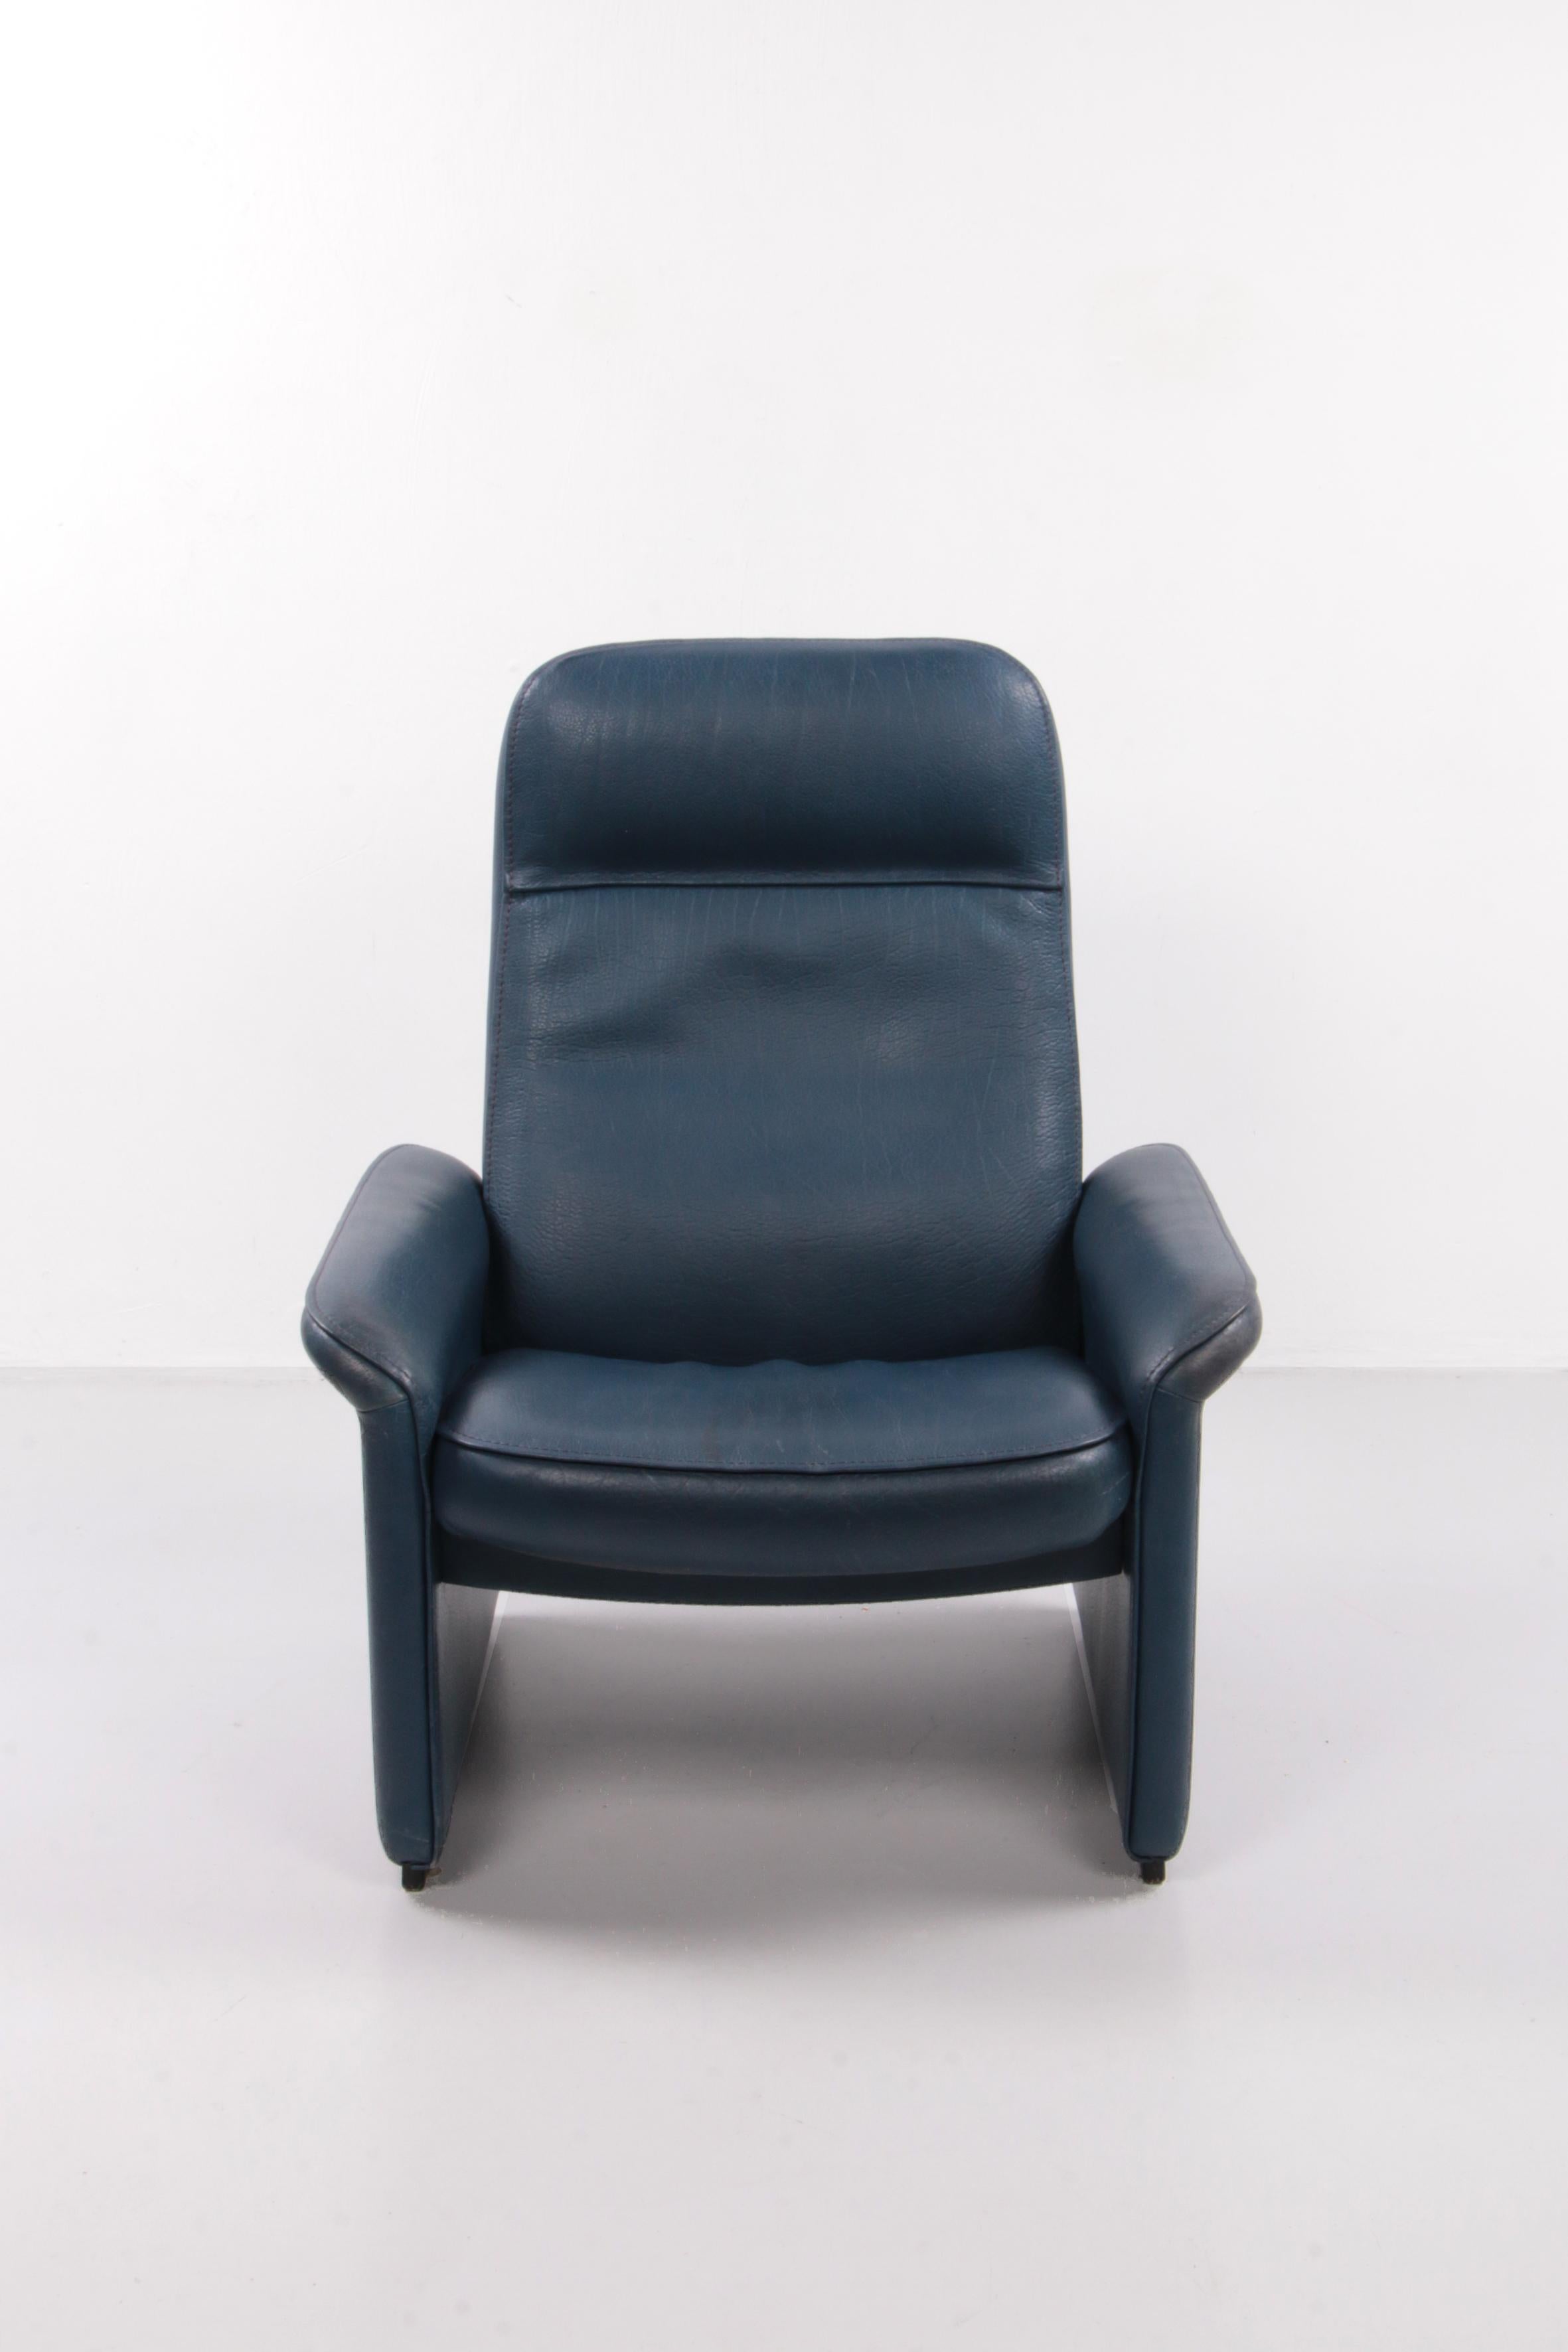 Modern De Sede Ds 50 Relax Armchair with Hocker Leather Petrol Colour, 1980 Switzerland